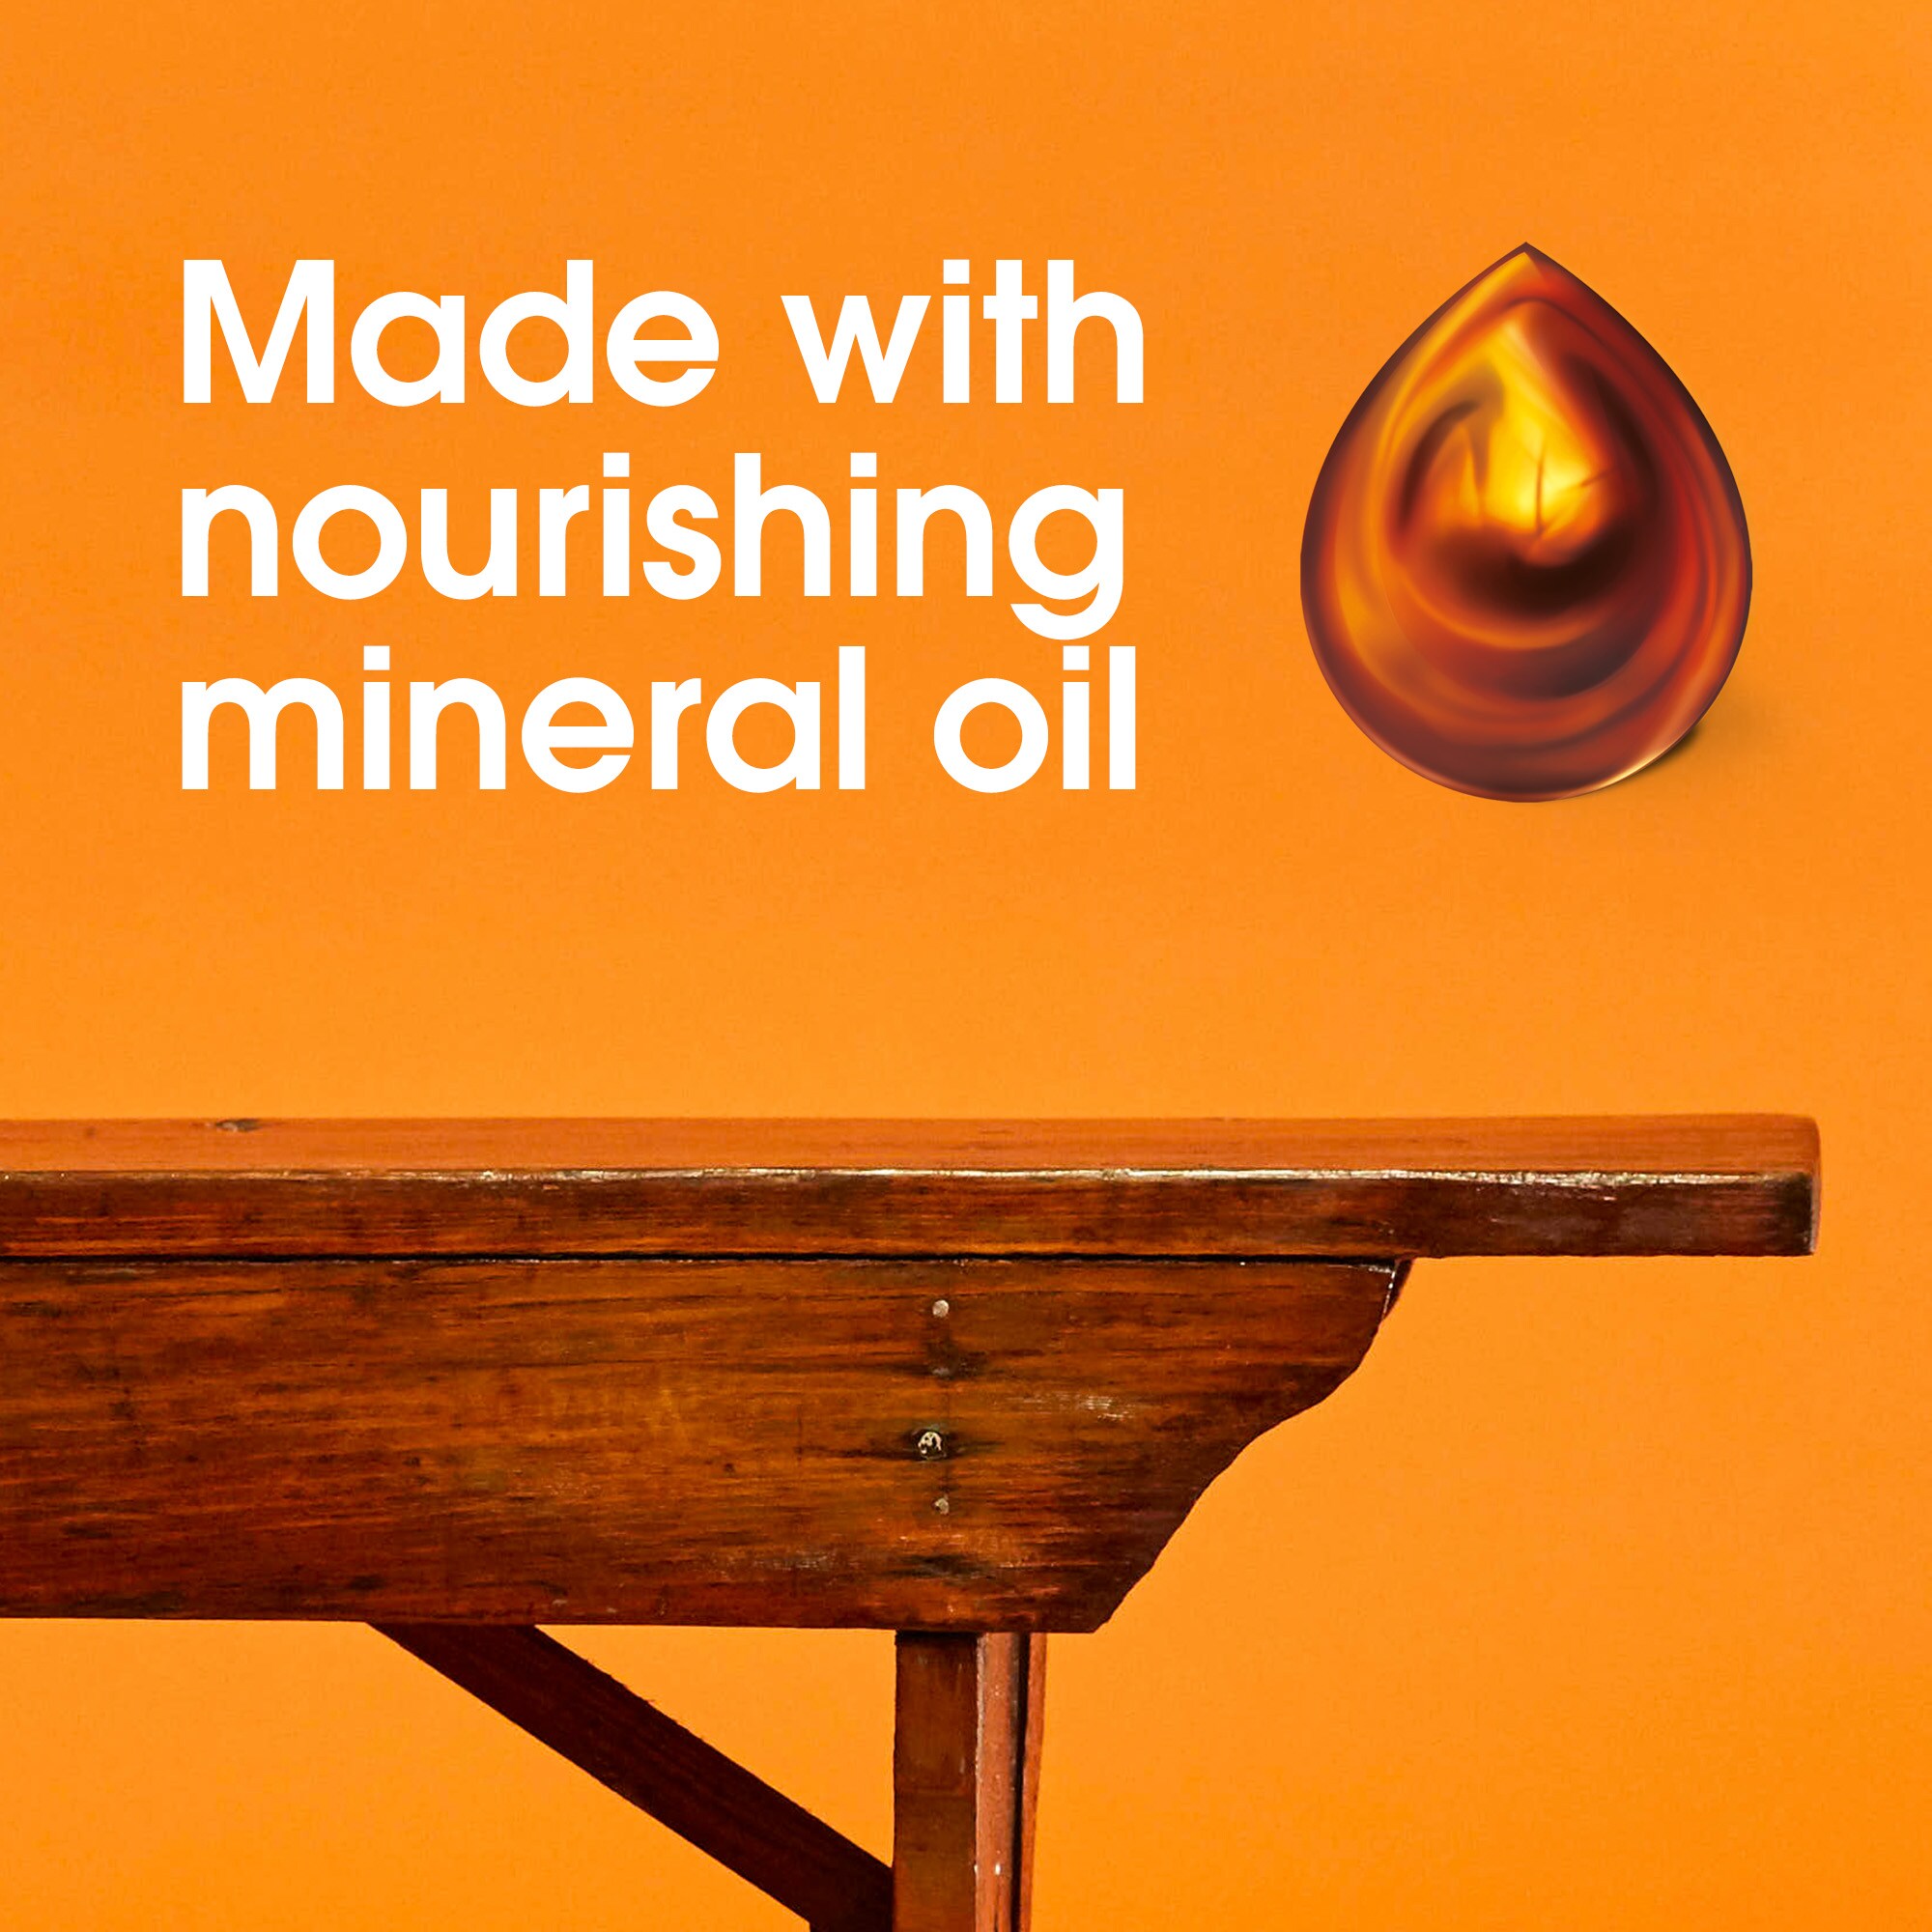 Furniture Clinic Boiled Linseed Oil for Wood Furniture & More Restore a  Finish for Furniture, Table Tops, Stone & Metal Wood Care for Interior Oak